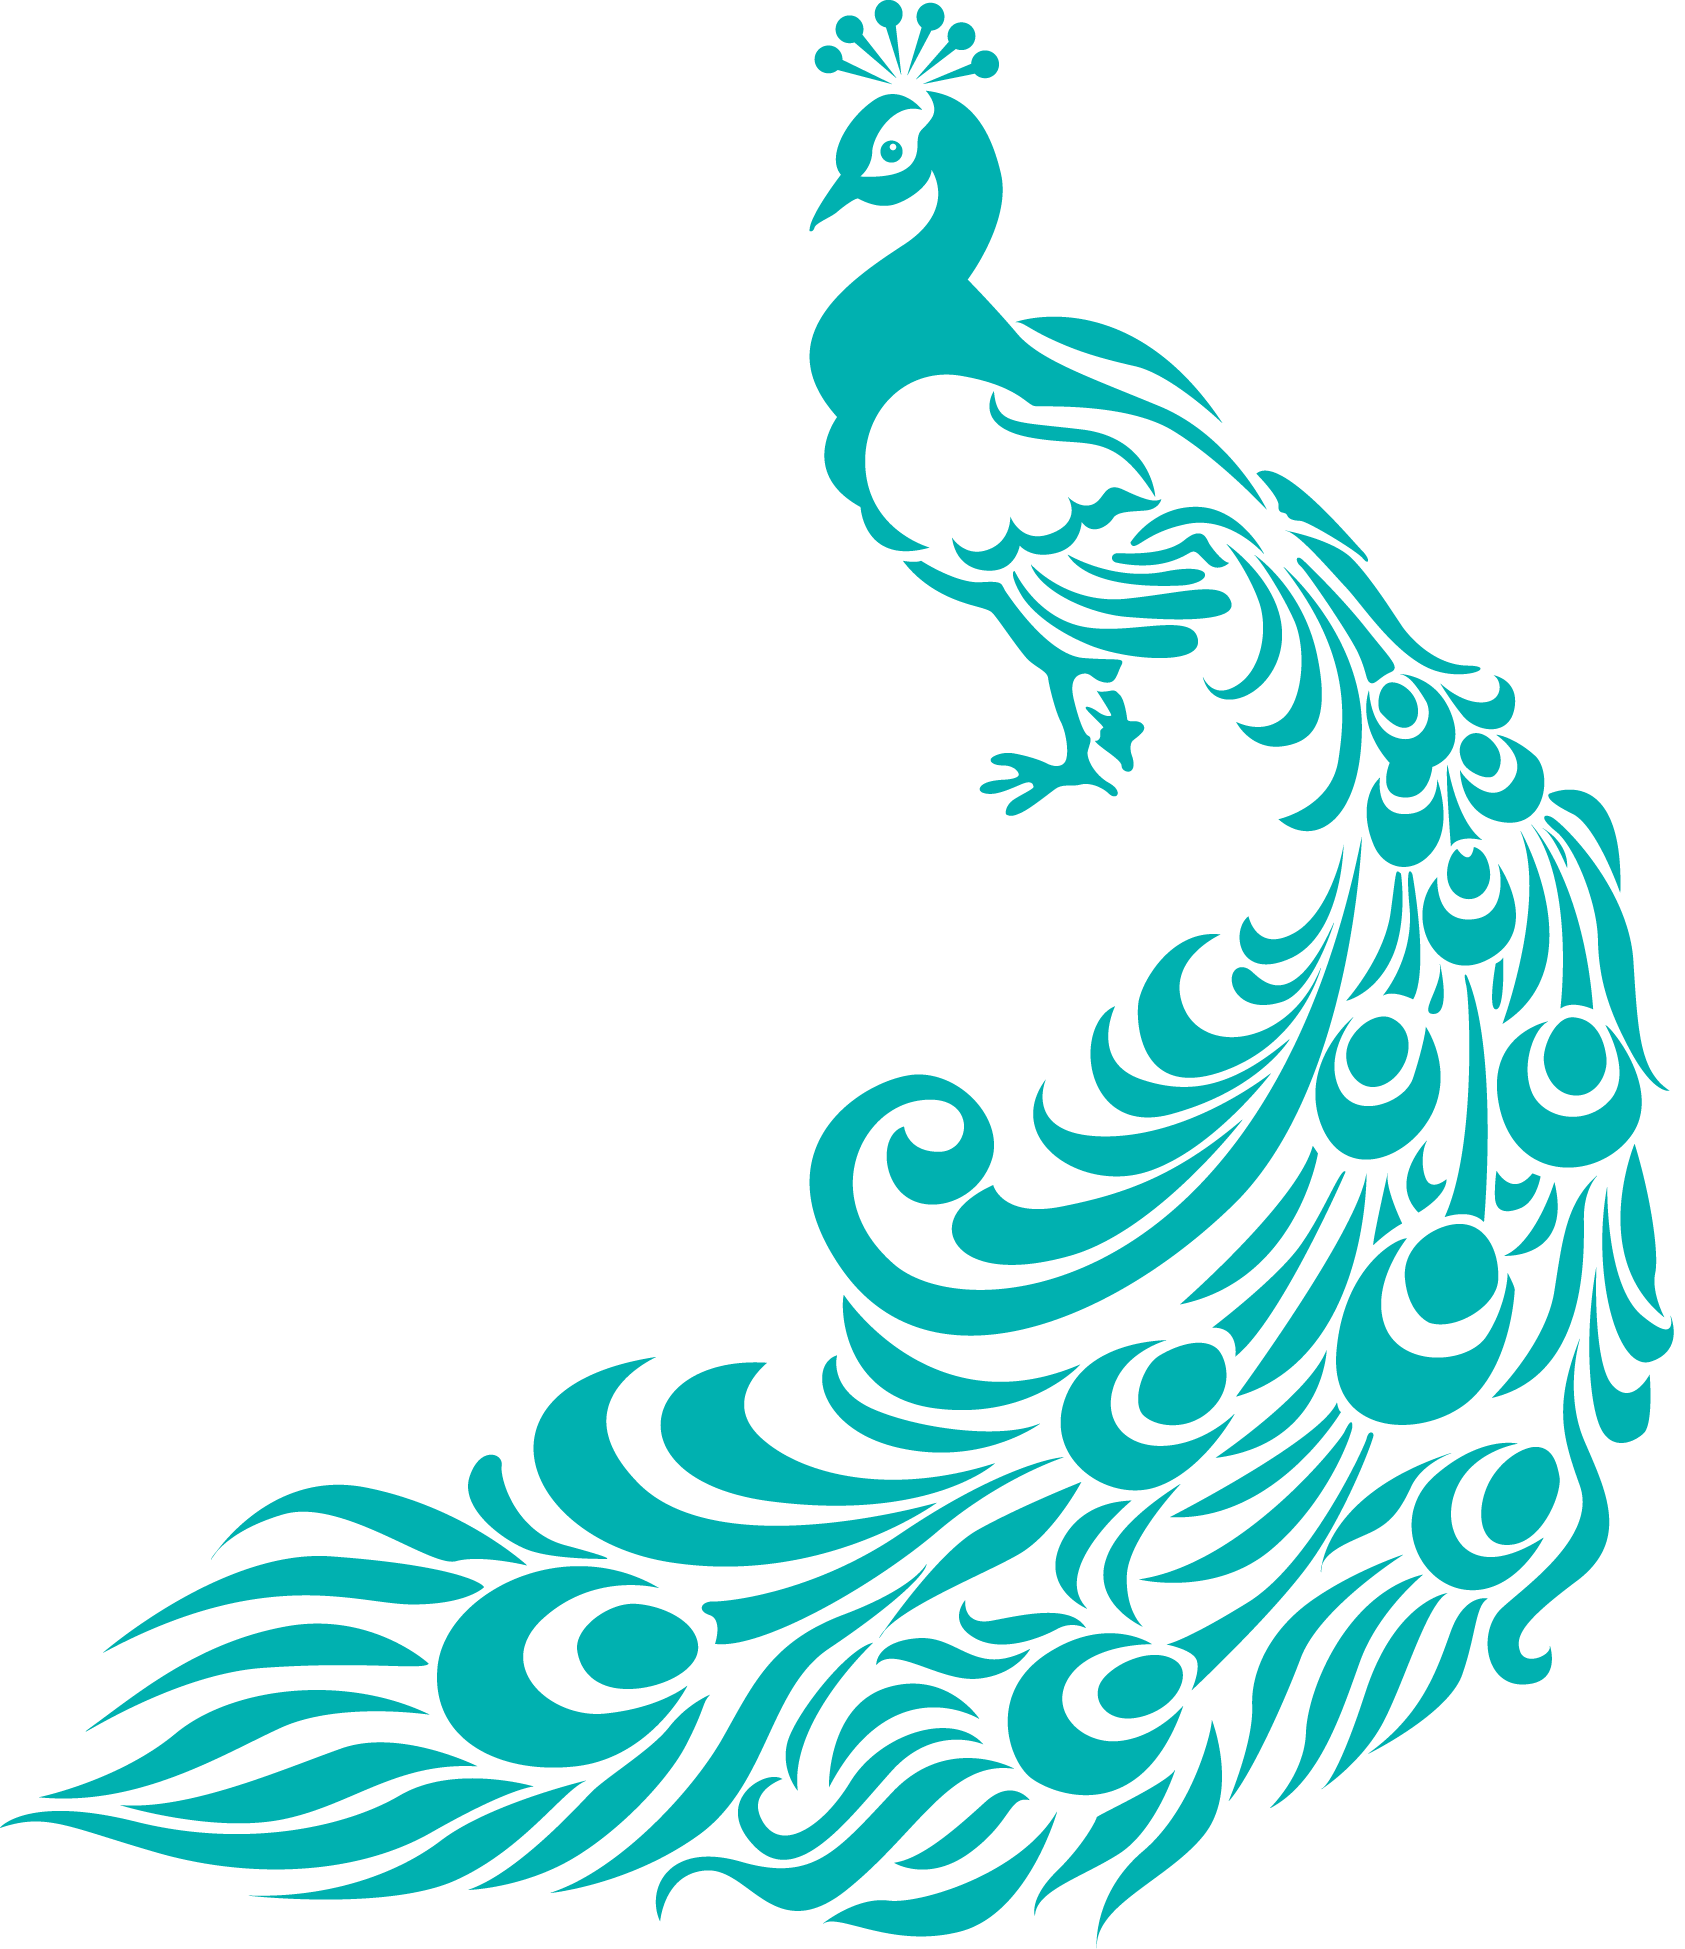 Head clipart peacock. Crowning ceremony of the